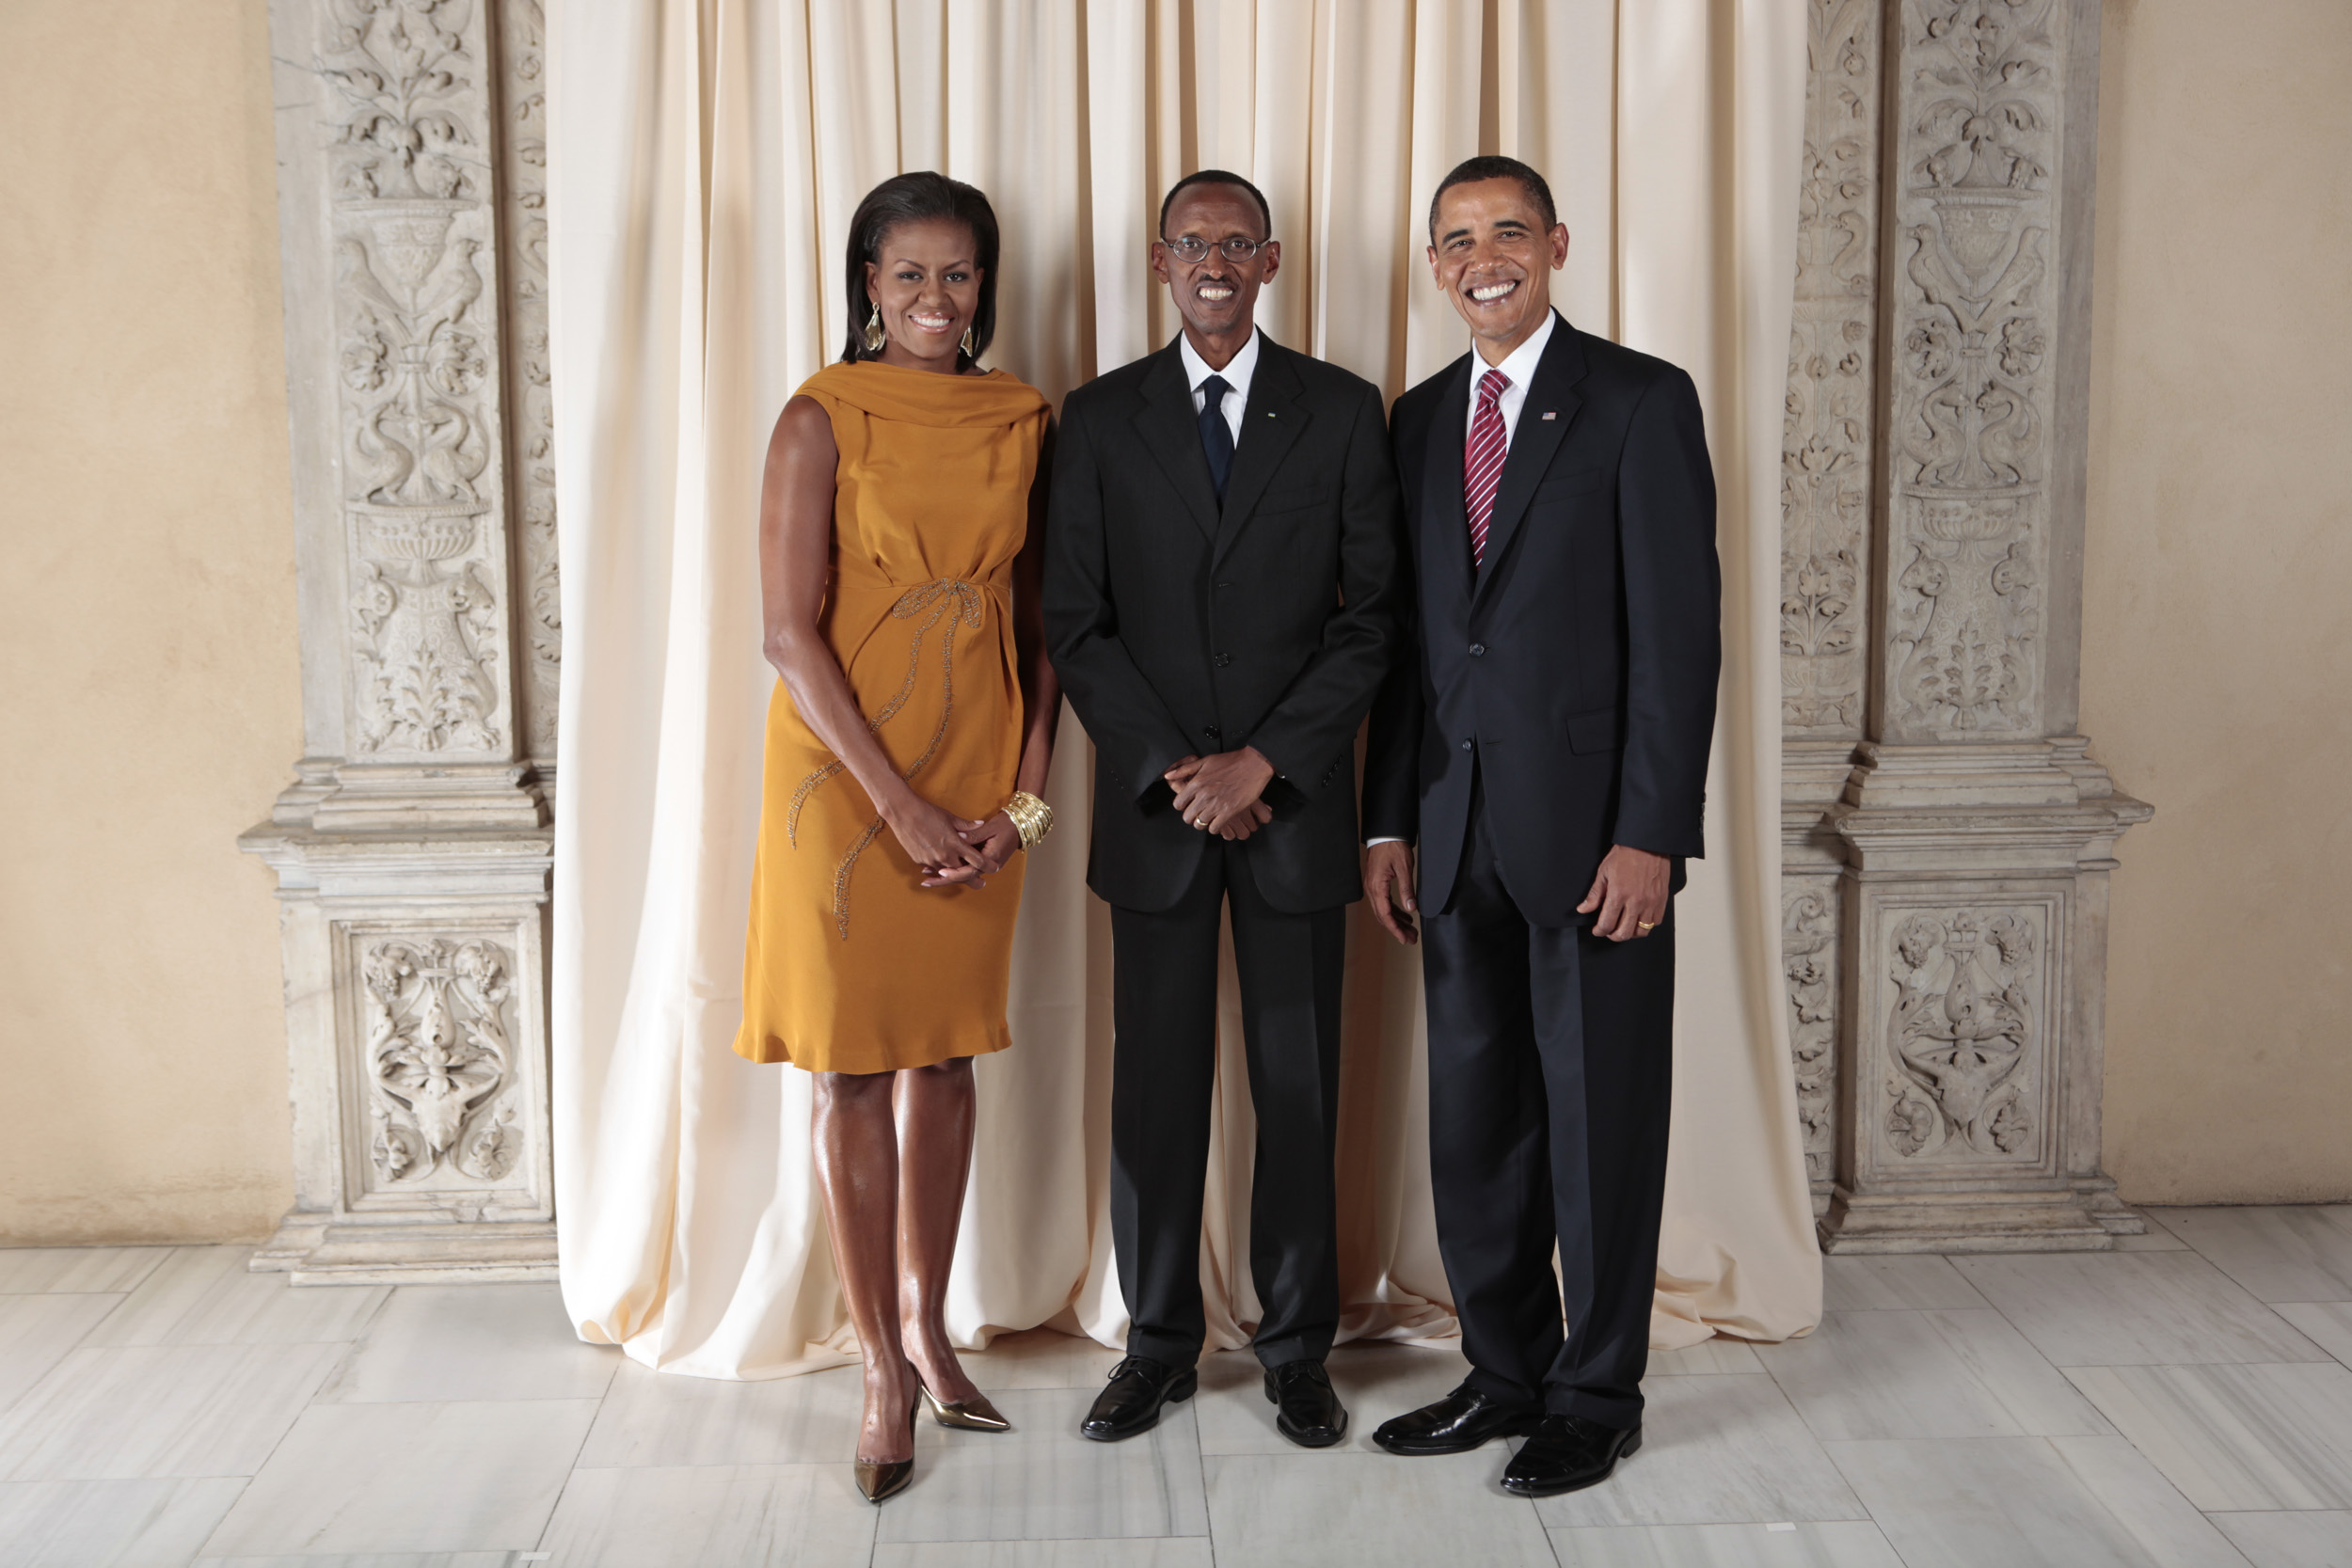 Paul Kagame with Obamas